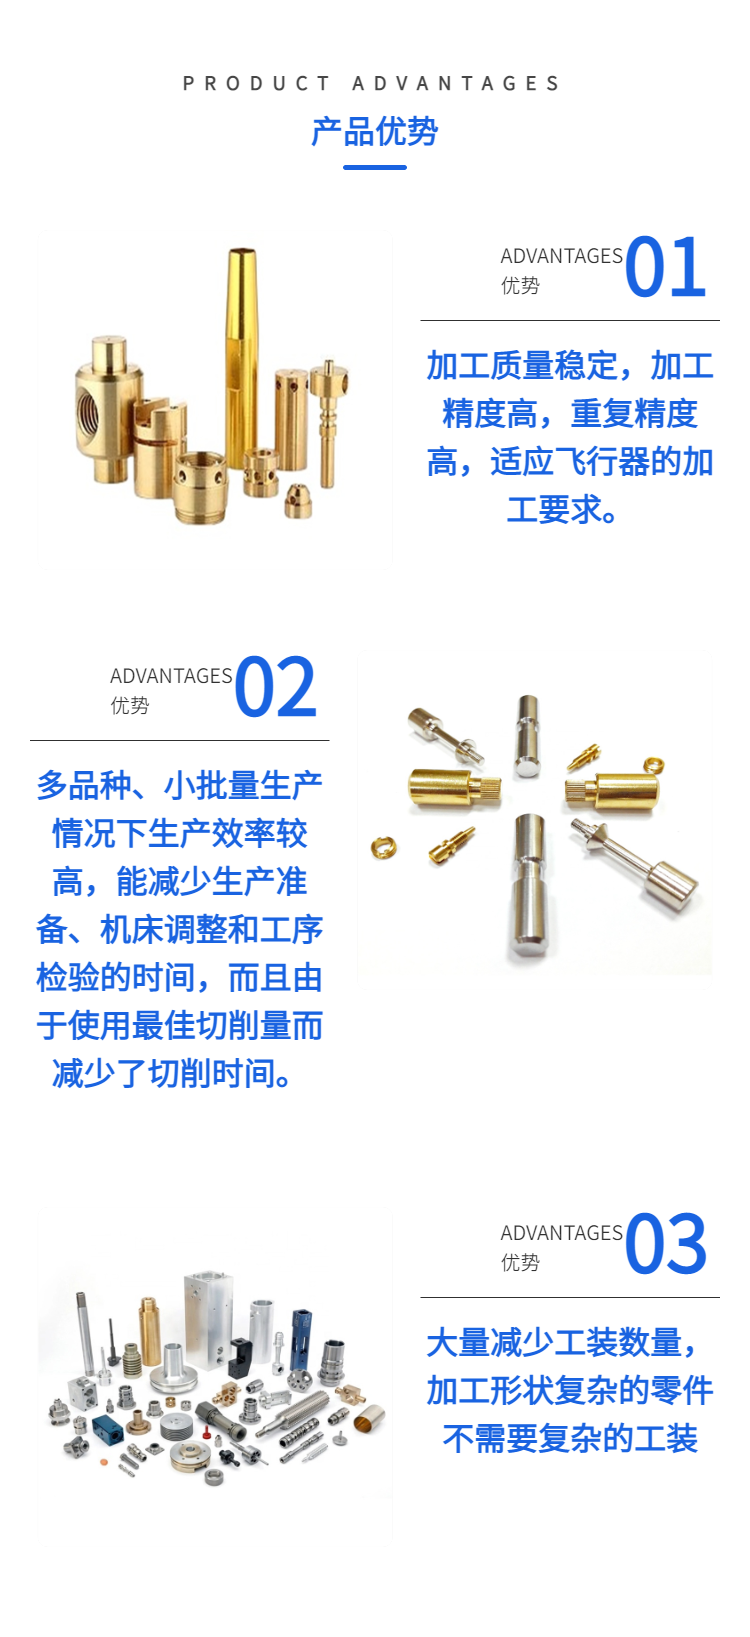 Aluminum alloy ring jewelry hardware accessories processing, customized CNC CNC production, polishing, laser carving